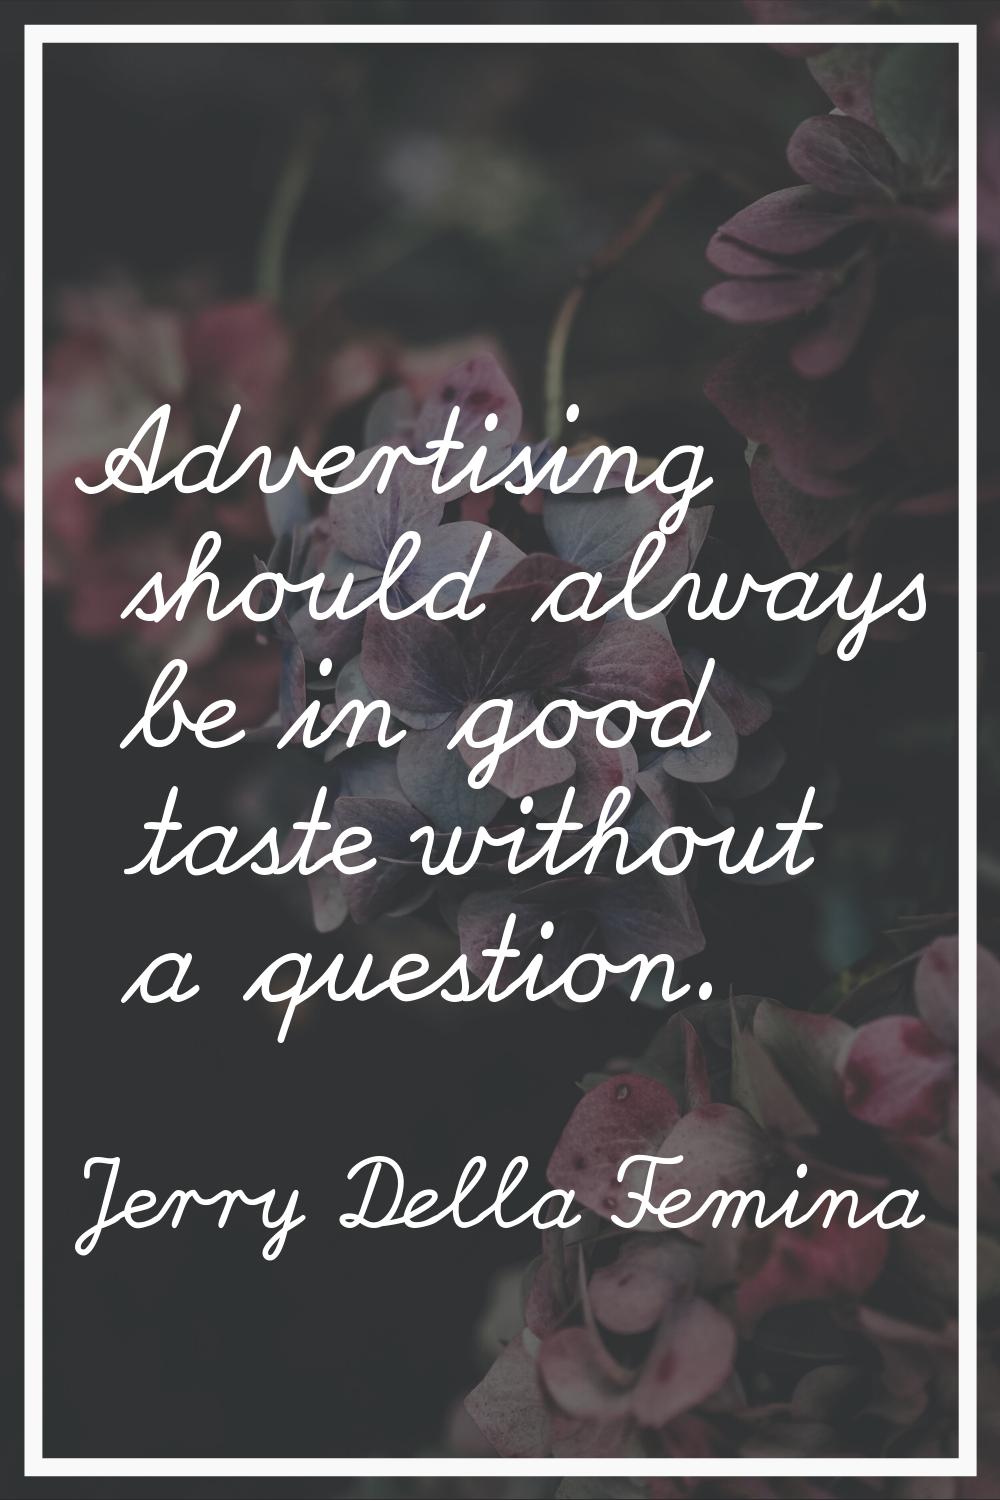 Advertising should always be in good taste without a question.